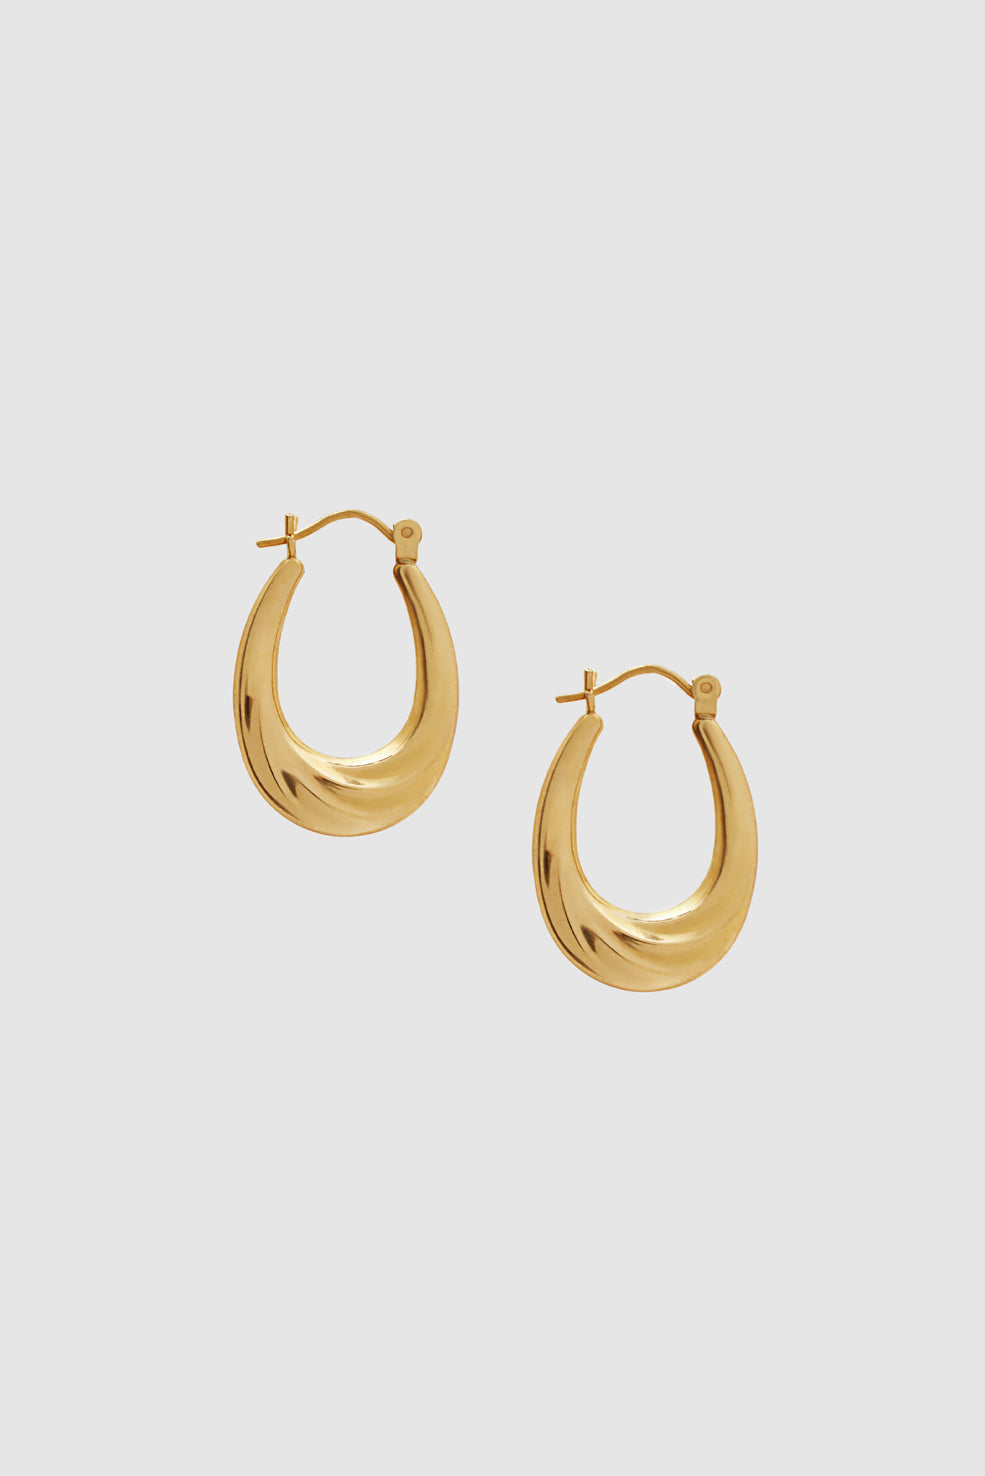 ANINE BING Chunky Oval Hoop Earrings - 14K Gold - Front View